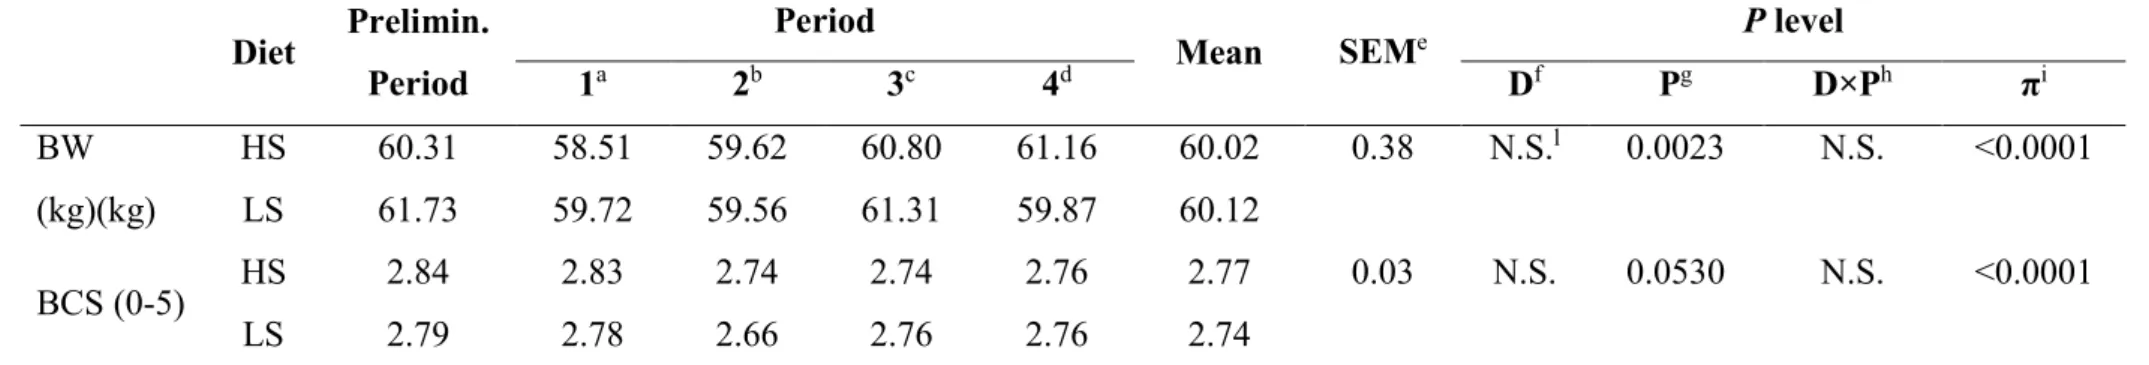 Table 6. Evolution of body weight (BW) and body condition score (BCS) in Saanen goats fed high-starch (HS) and low-starch (LS) diets in mid- mid-lactation